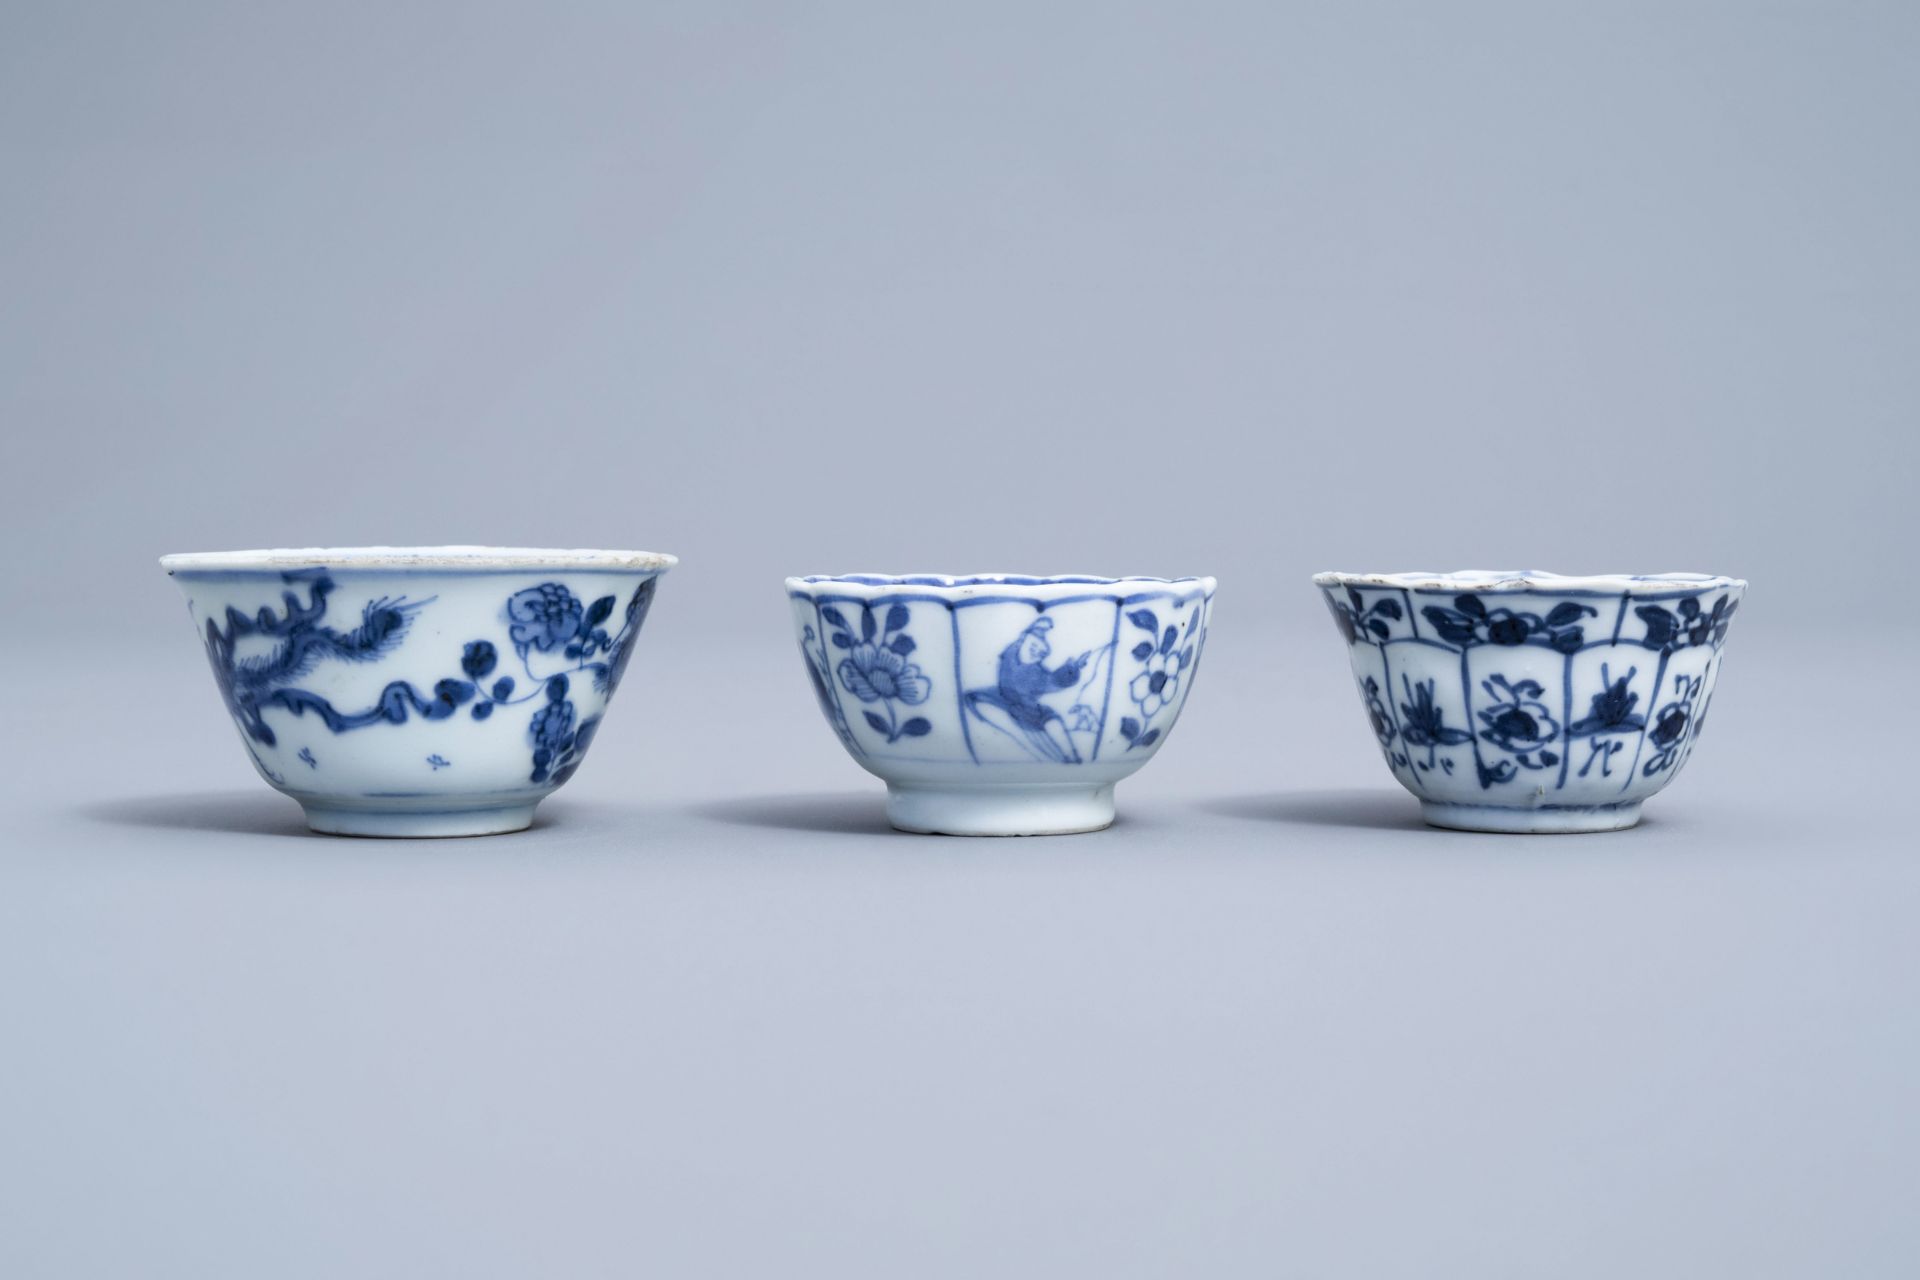 A varied collection of Chinese blue and white porcelain, 18th C. and later - Image 34 of 54